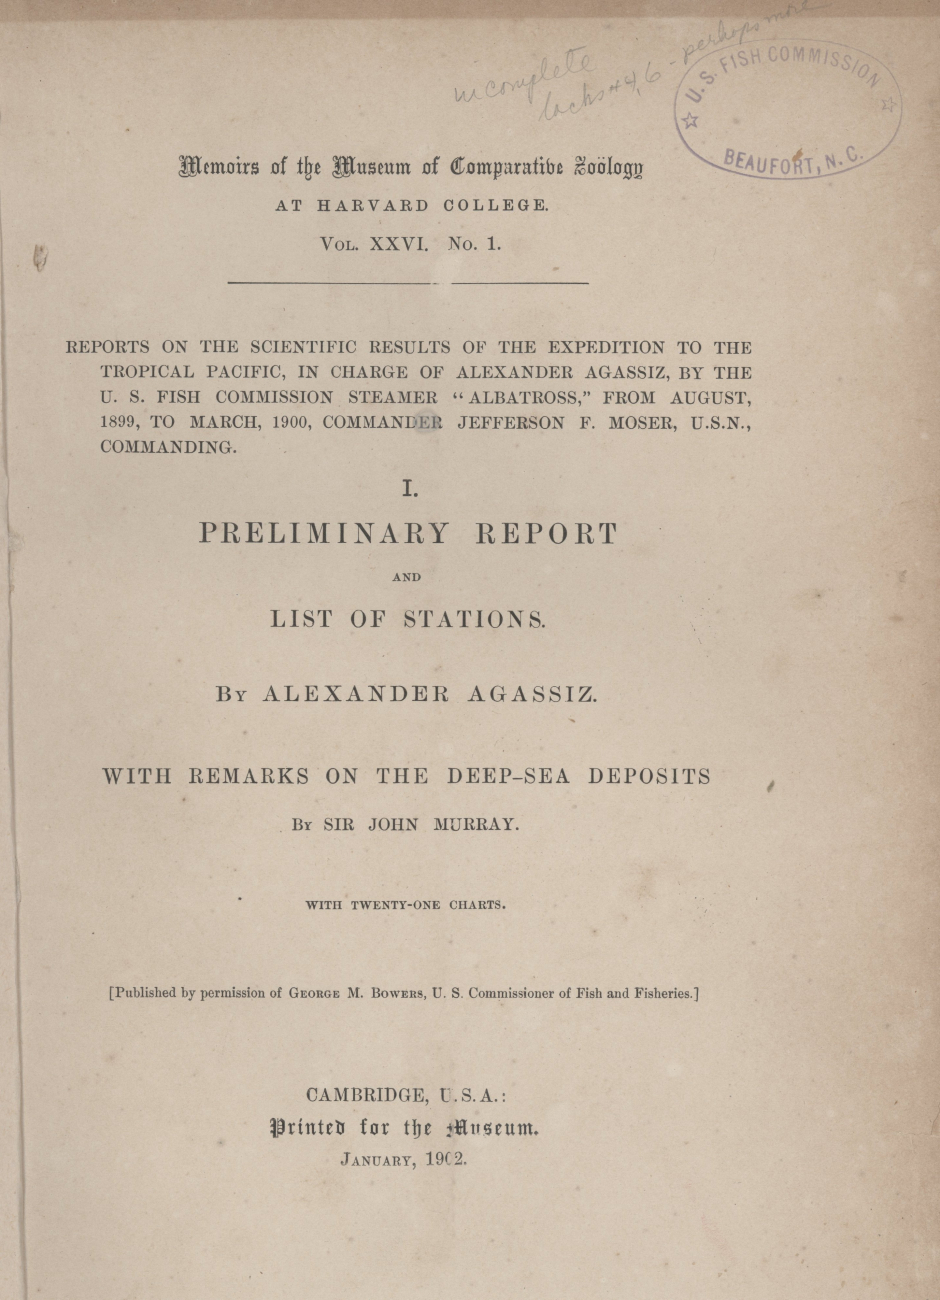 Cover of the Preliminary Report and List of Stations  obtained during the sscientific expedition of the Albatross to the tropical Pacific